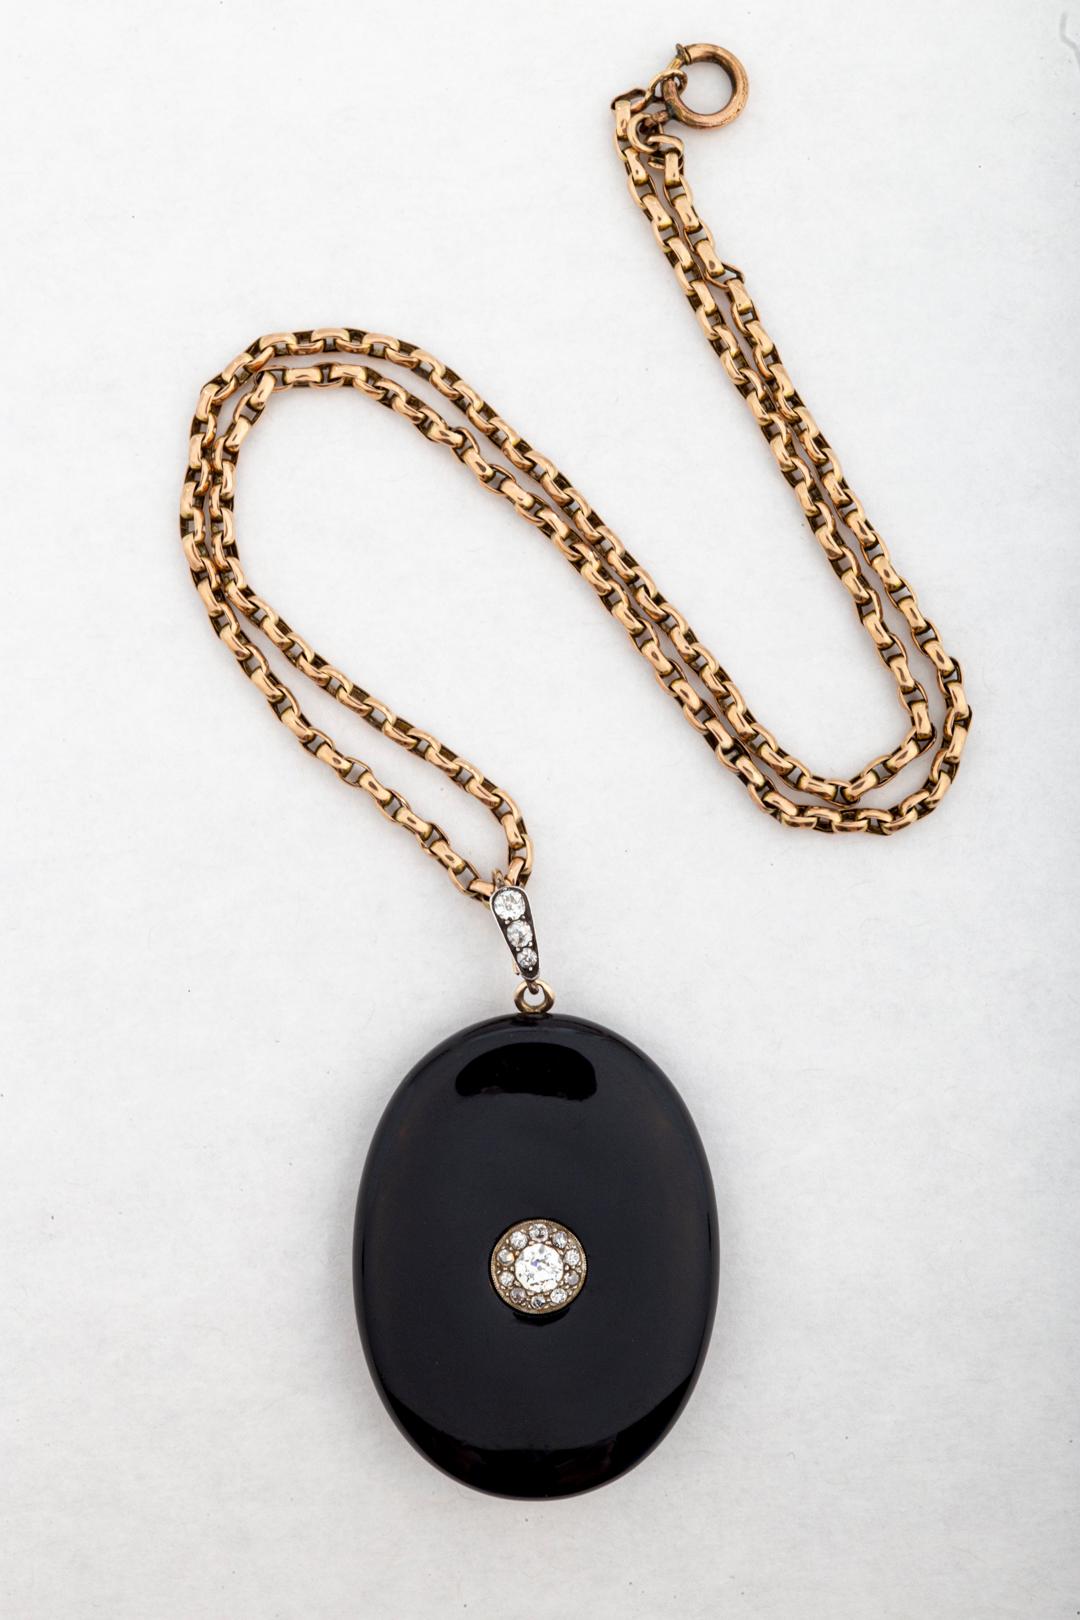 A large Victorian black enamel and diamond locket locket that is the upmost of elegance while it suits all the fashion we wear today. If I were not in business I would treasure it and wear it with a Tuxedo jacket and blue jeans or a denim shirt. The